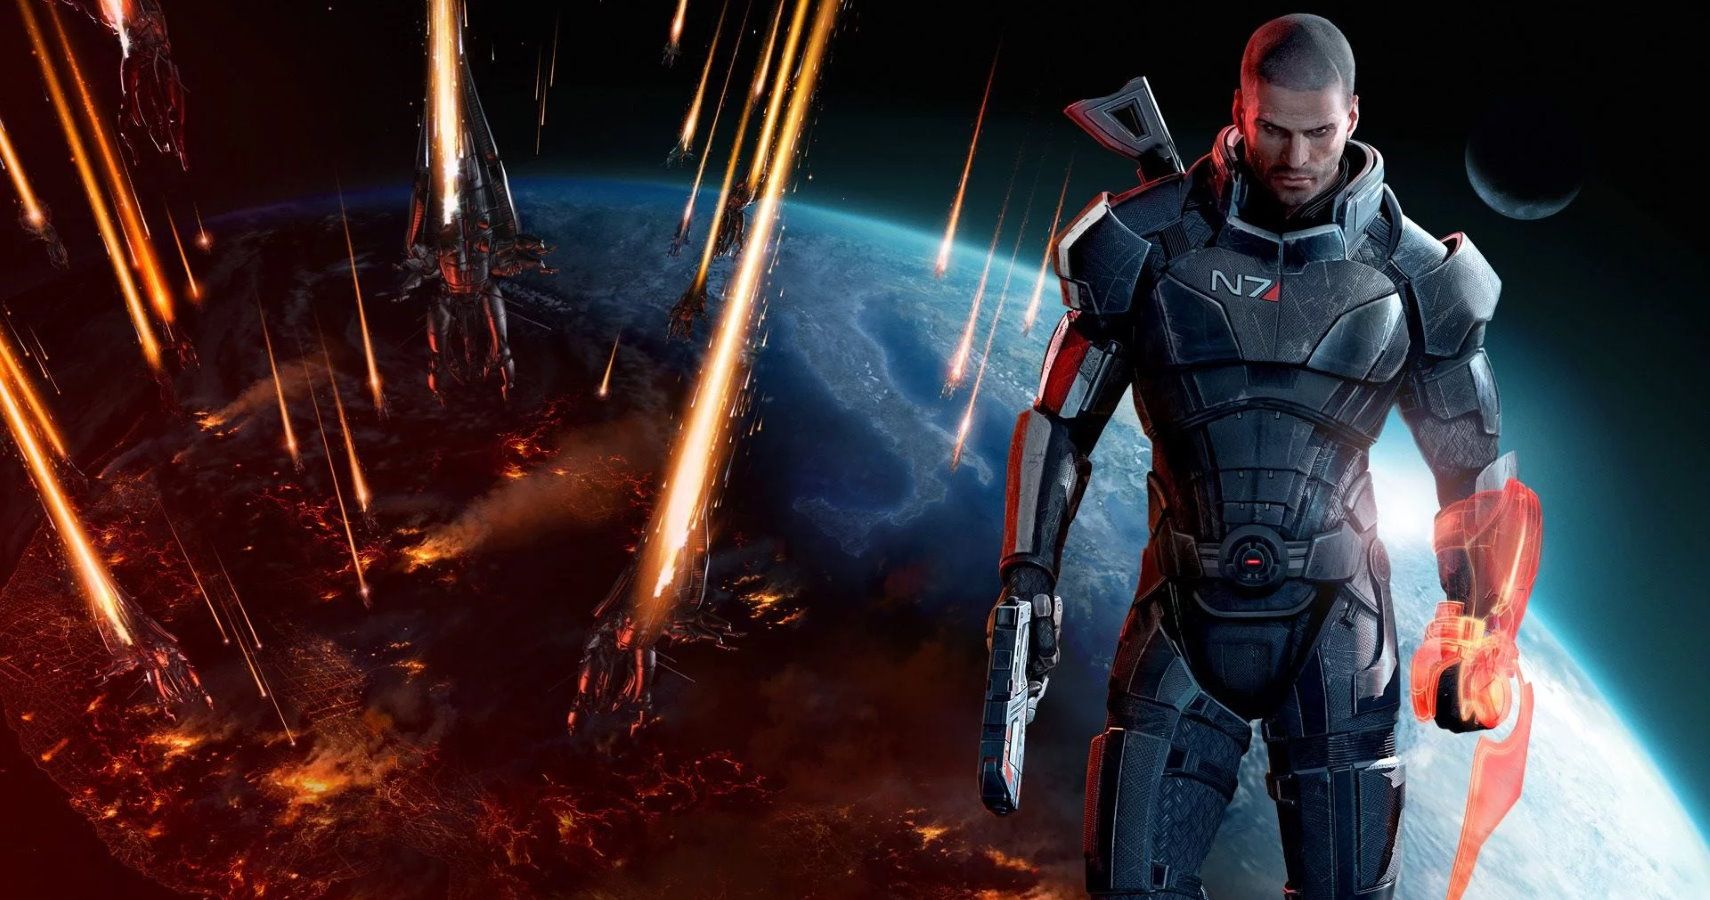 mass effect 3 mac walters and casey hudson creative control